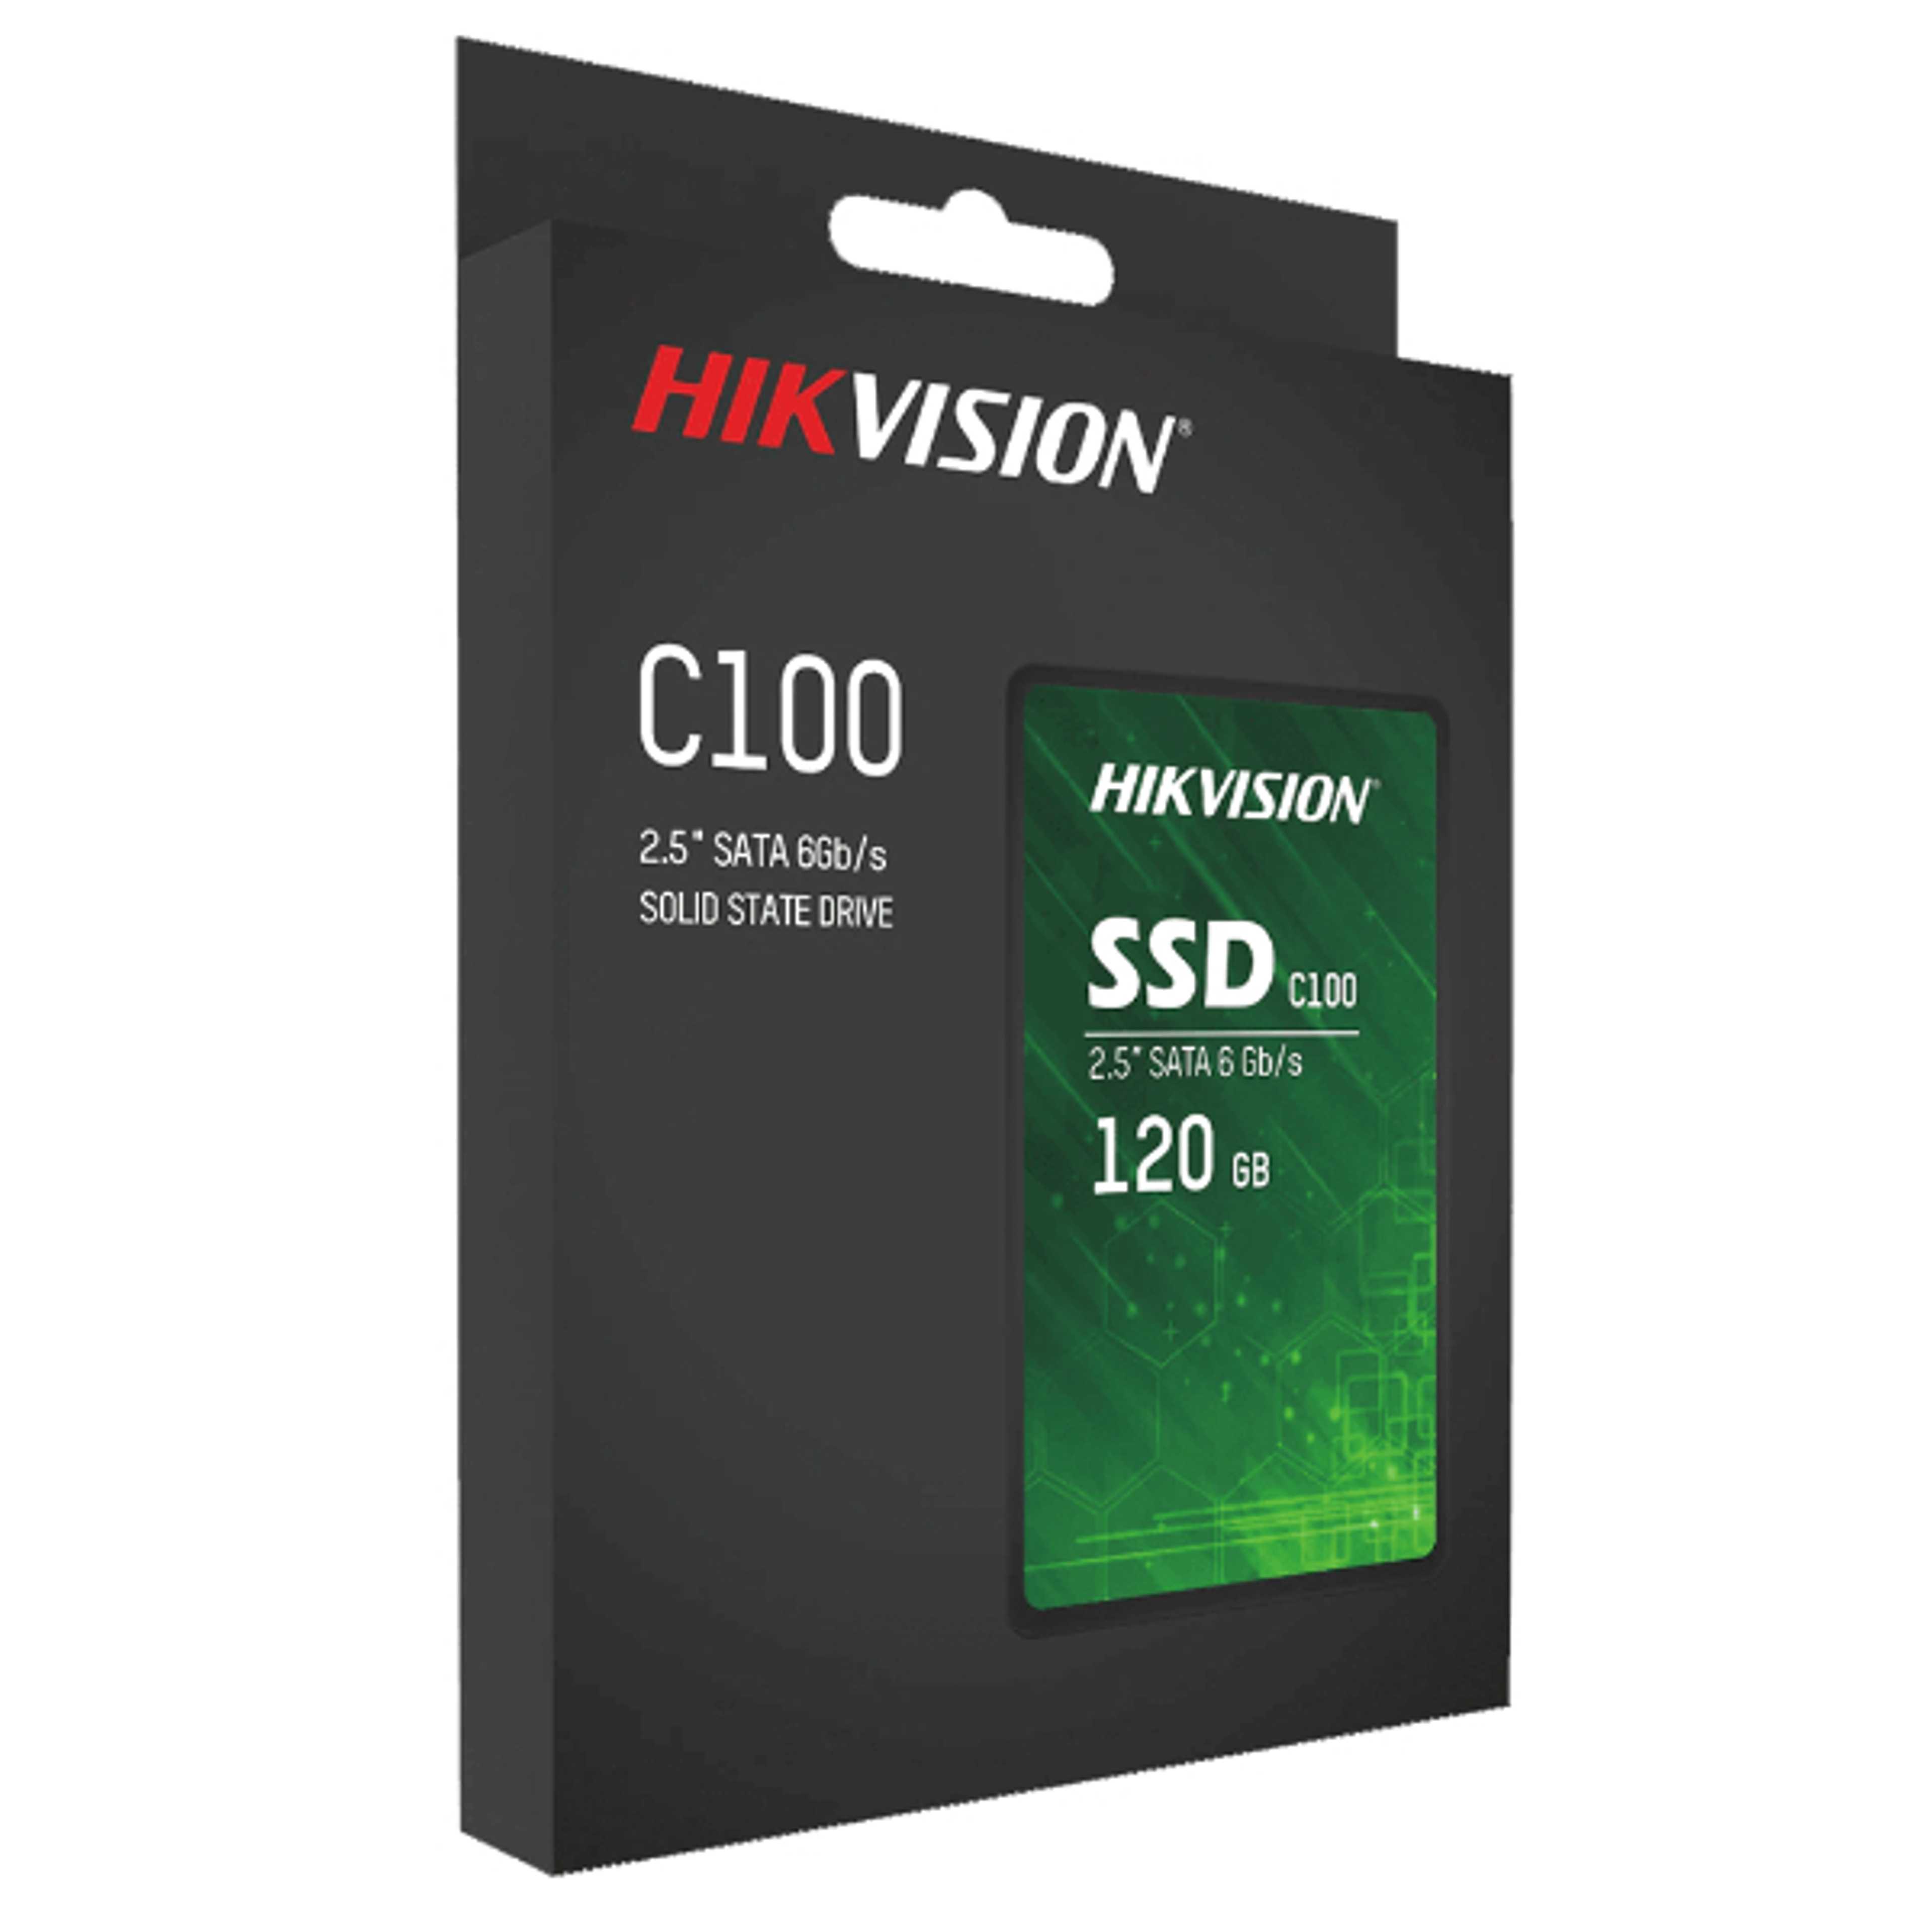 Hikvision 120GB SSD Solid State Drive C100Official Warranty